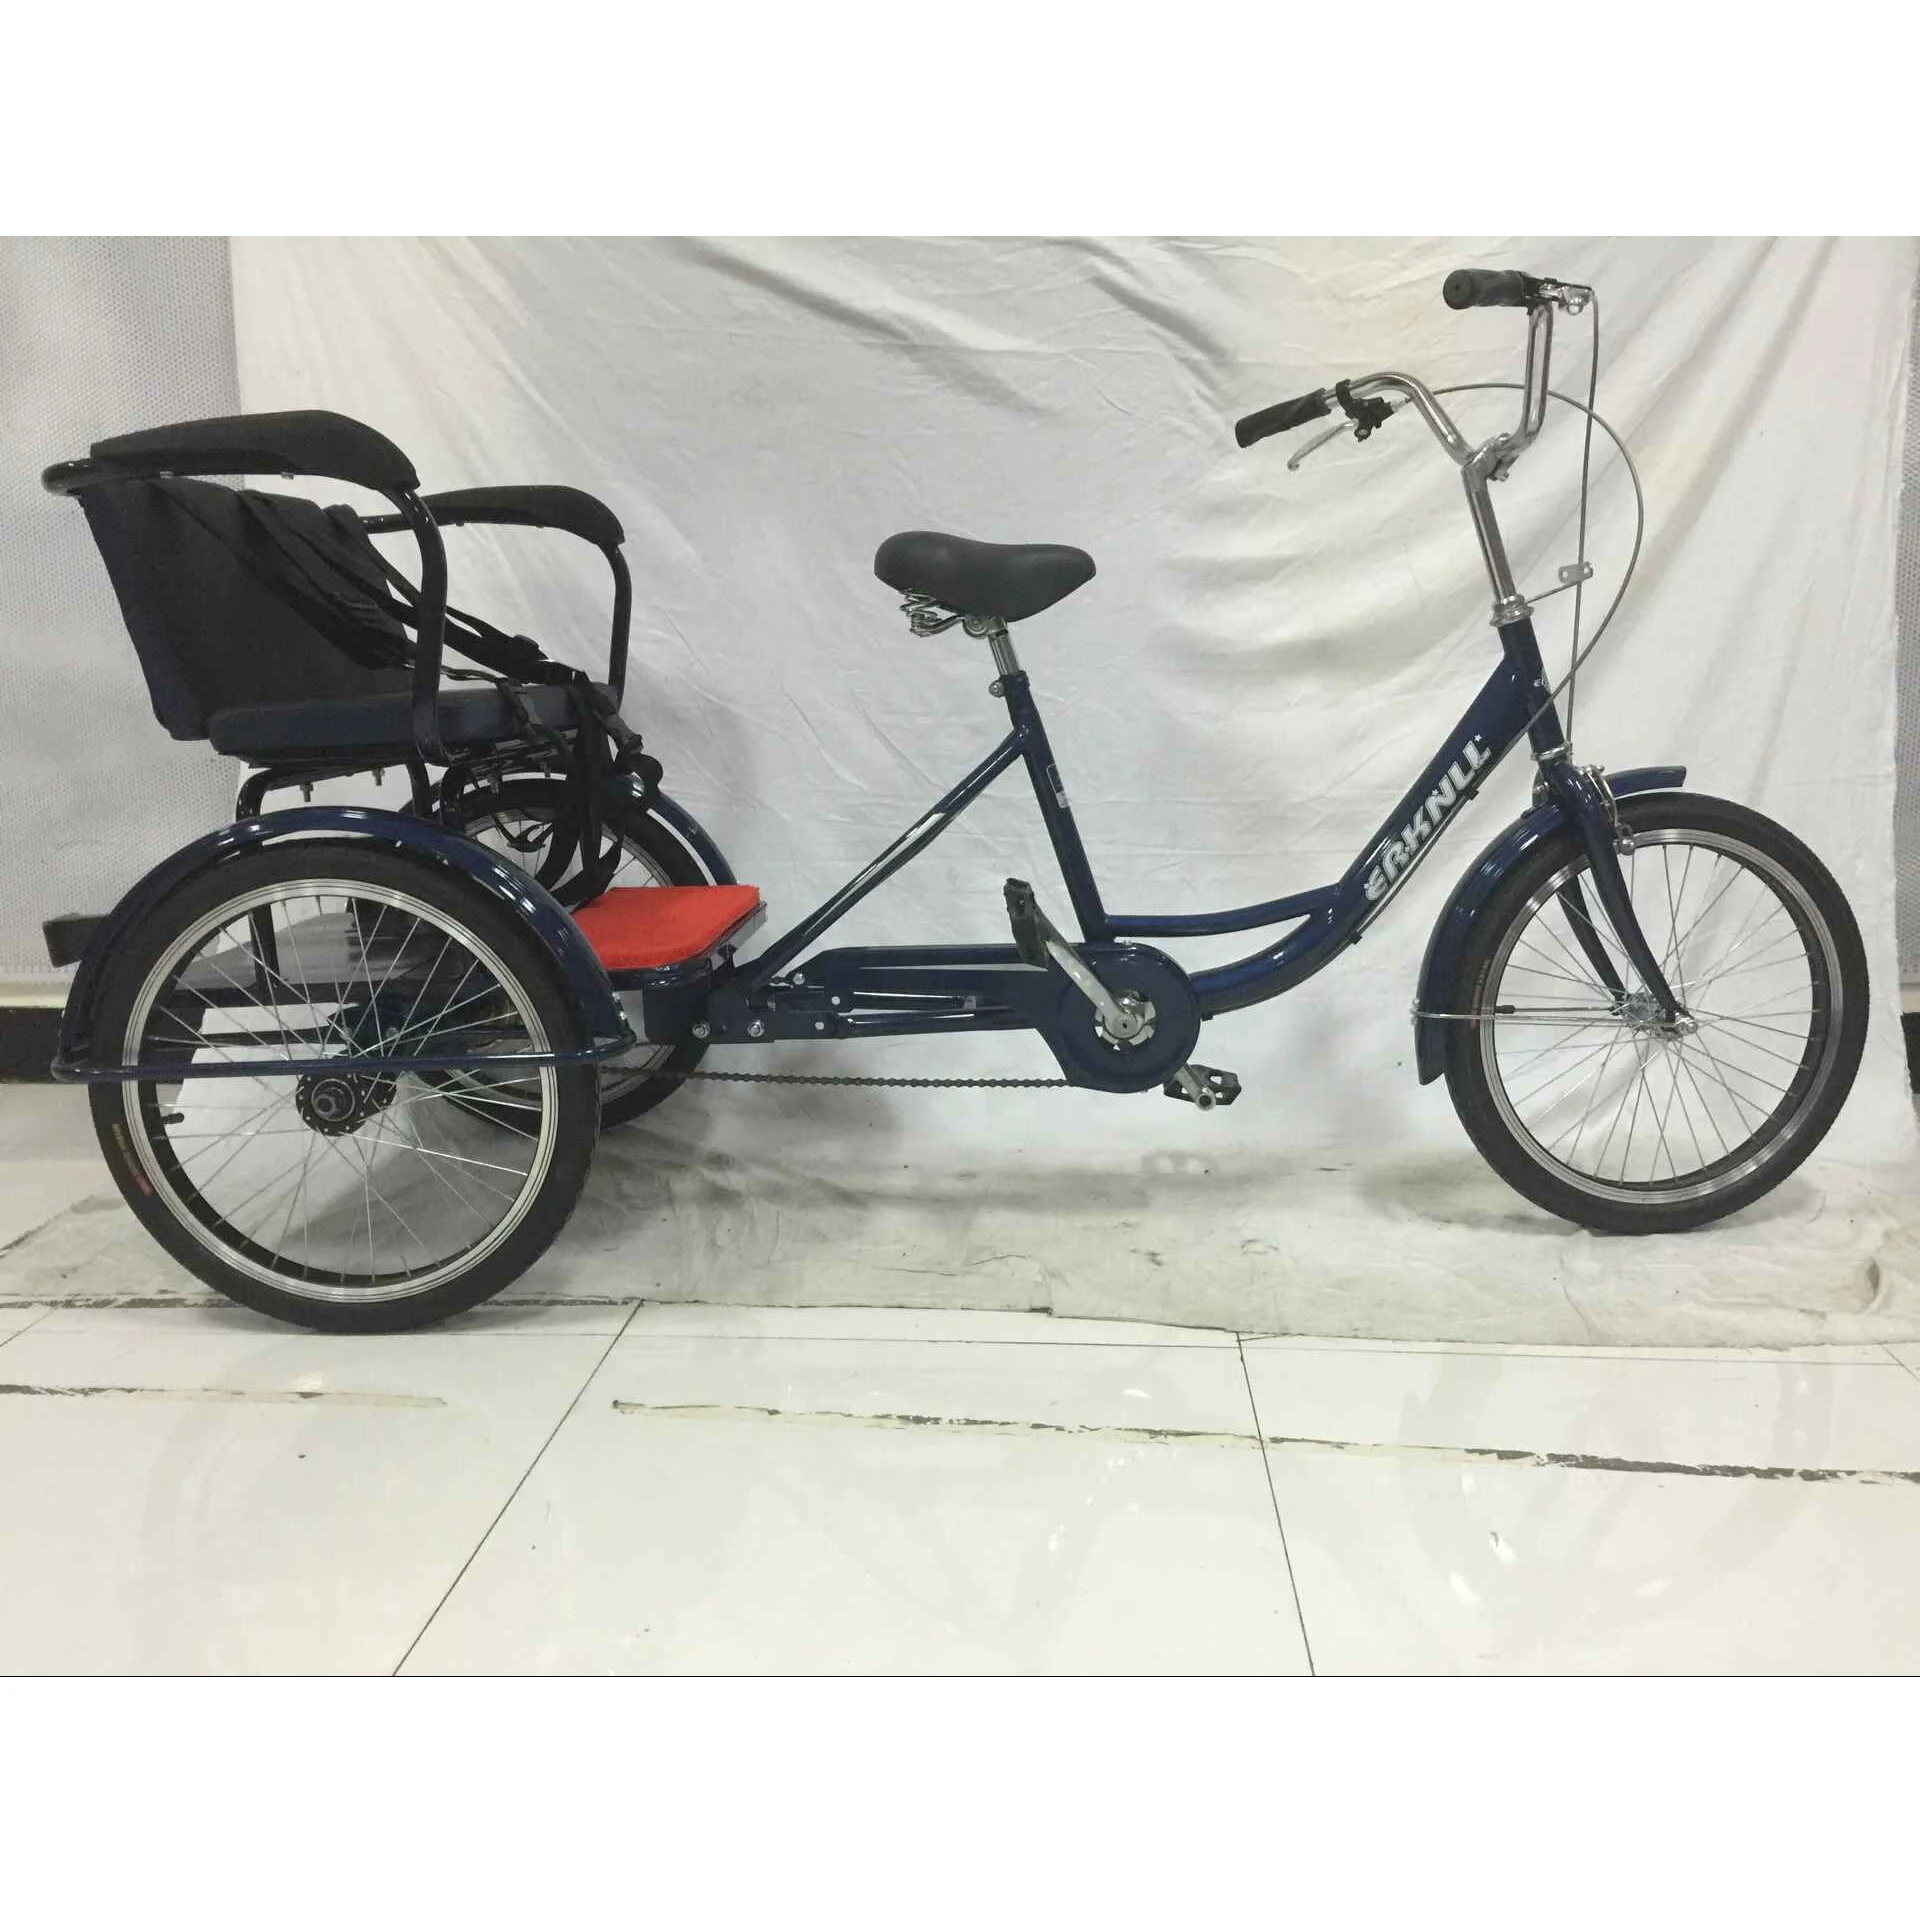 tricycle for adults with passenger seat